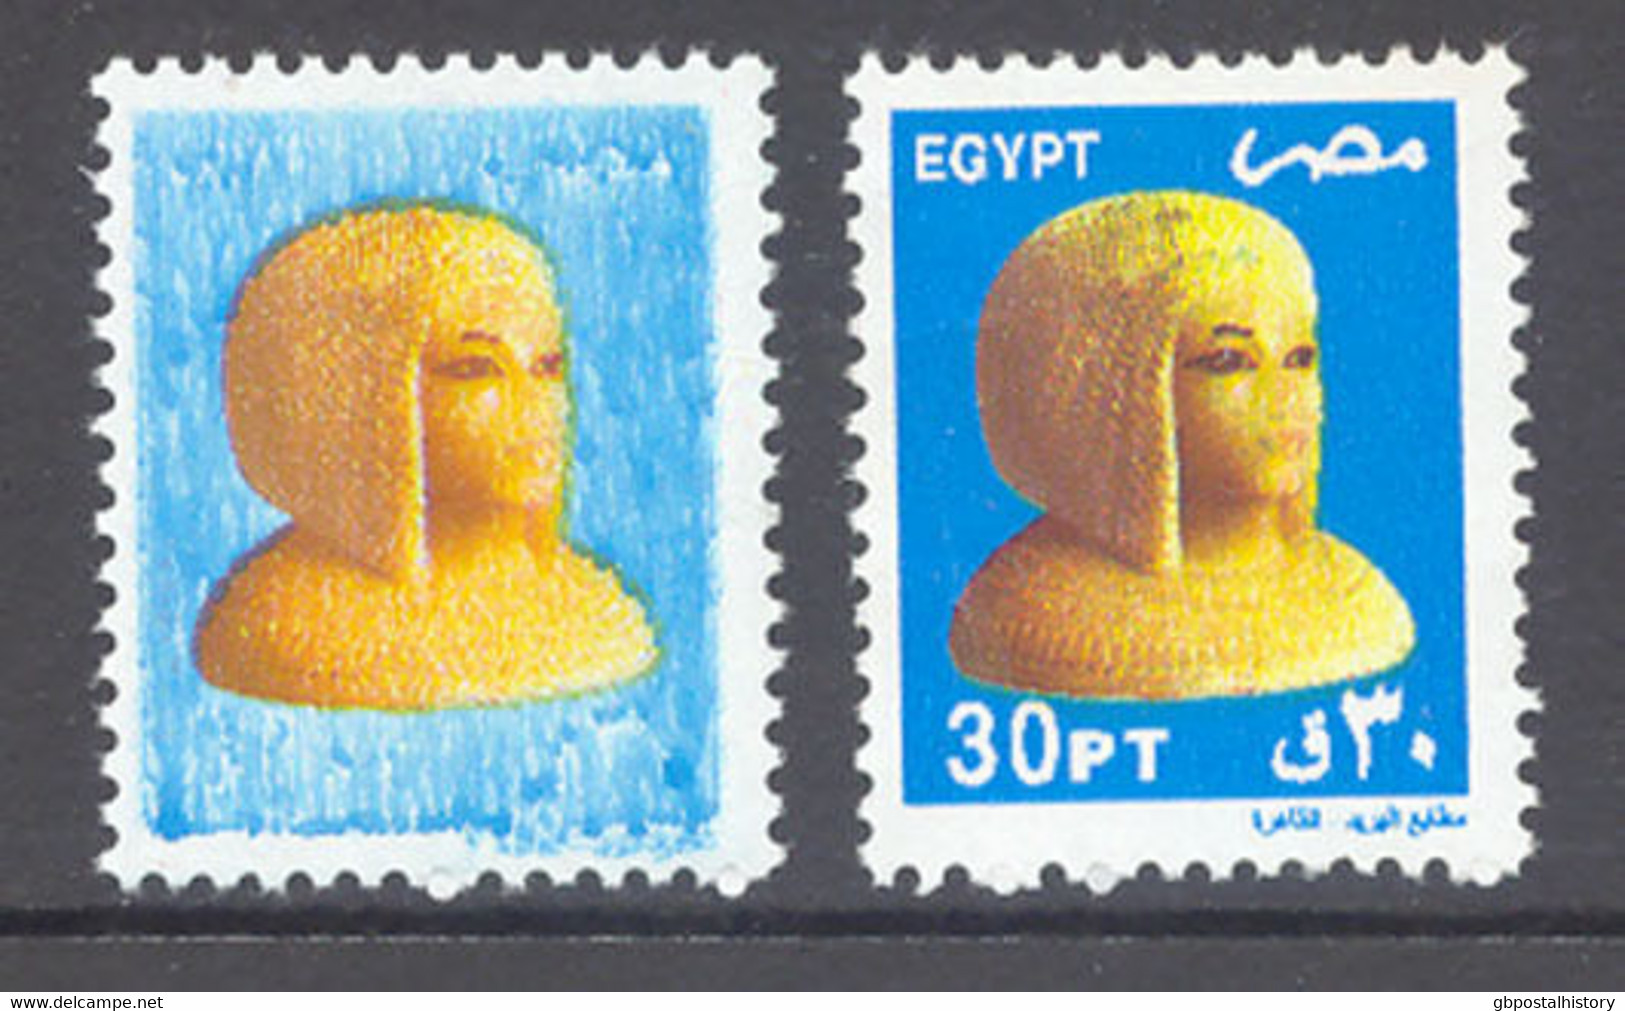 EGYPT 2002 Bust Of Queen Merit-Aton U/M MAJOR VARIETY: NO COUNTRYNAME - NO VALUE - Unused Stamps